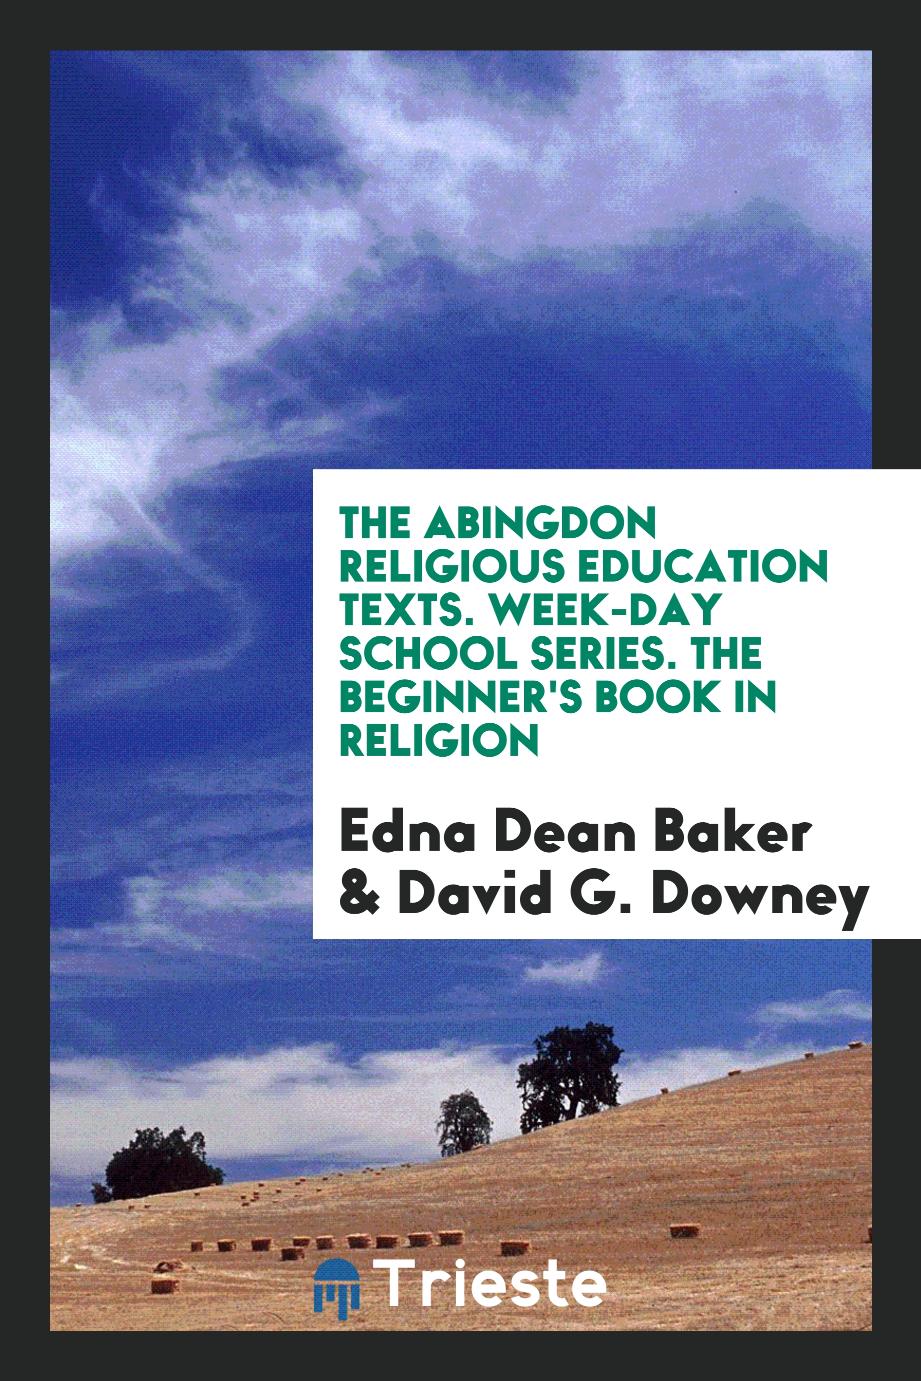 The Abingdon Religious Education Texts. Week-Day School Series. The Beginner's Book in Religion